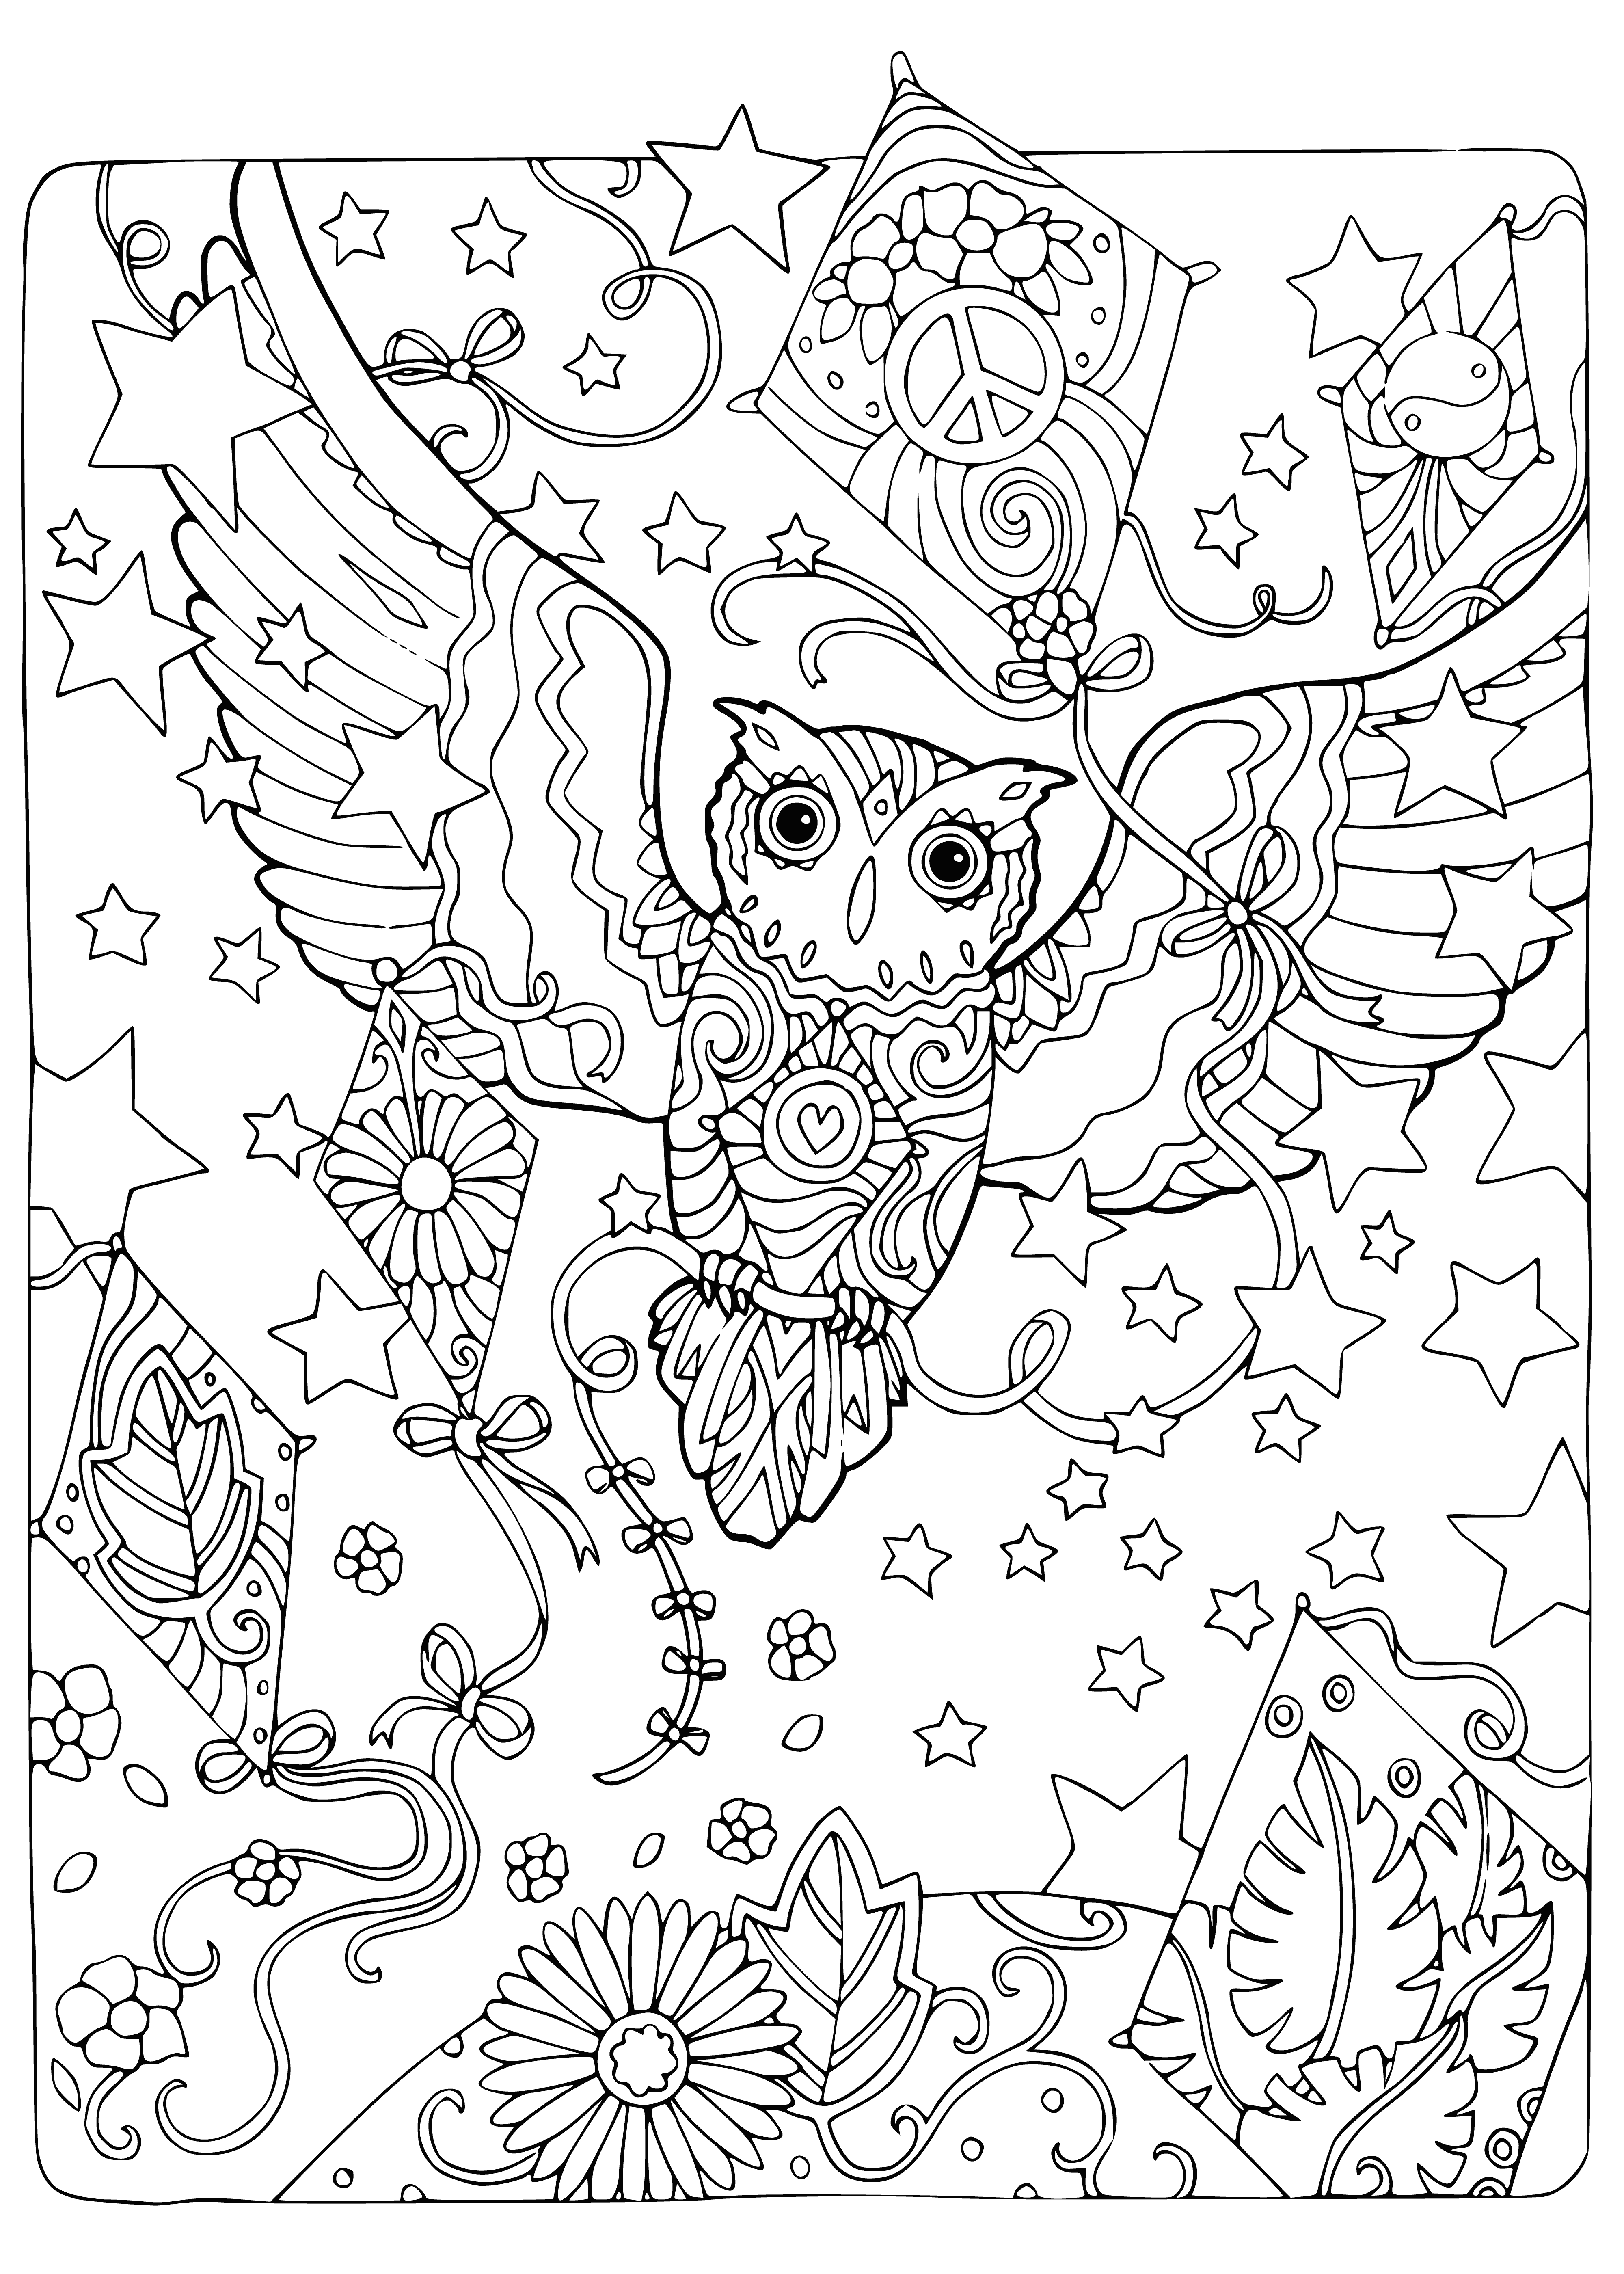 Flying a kite coloring page